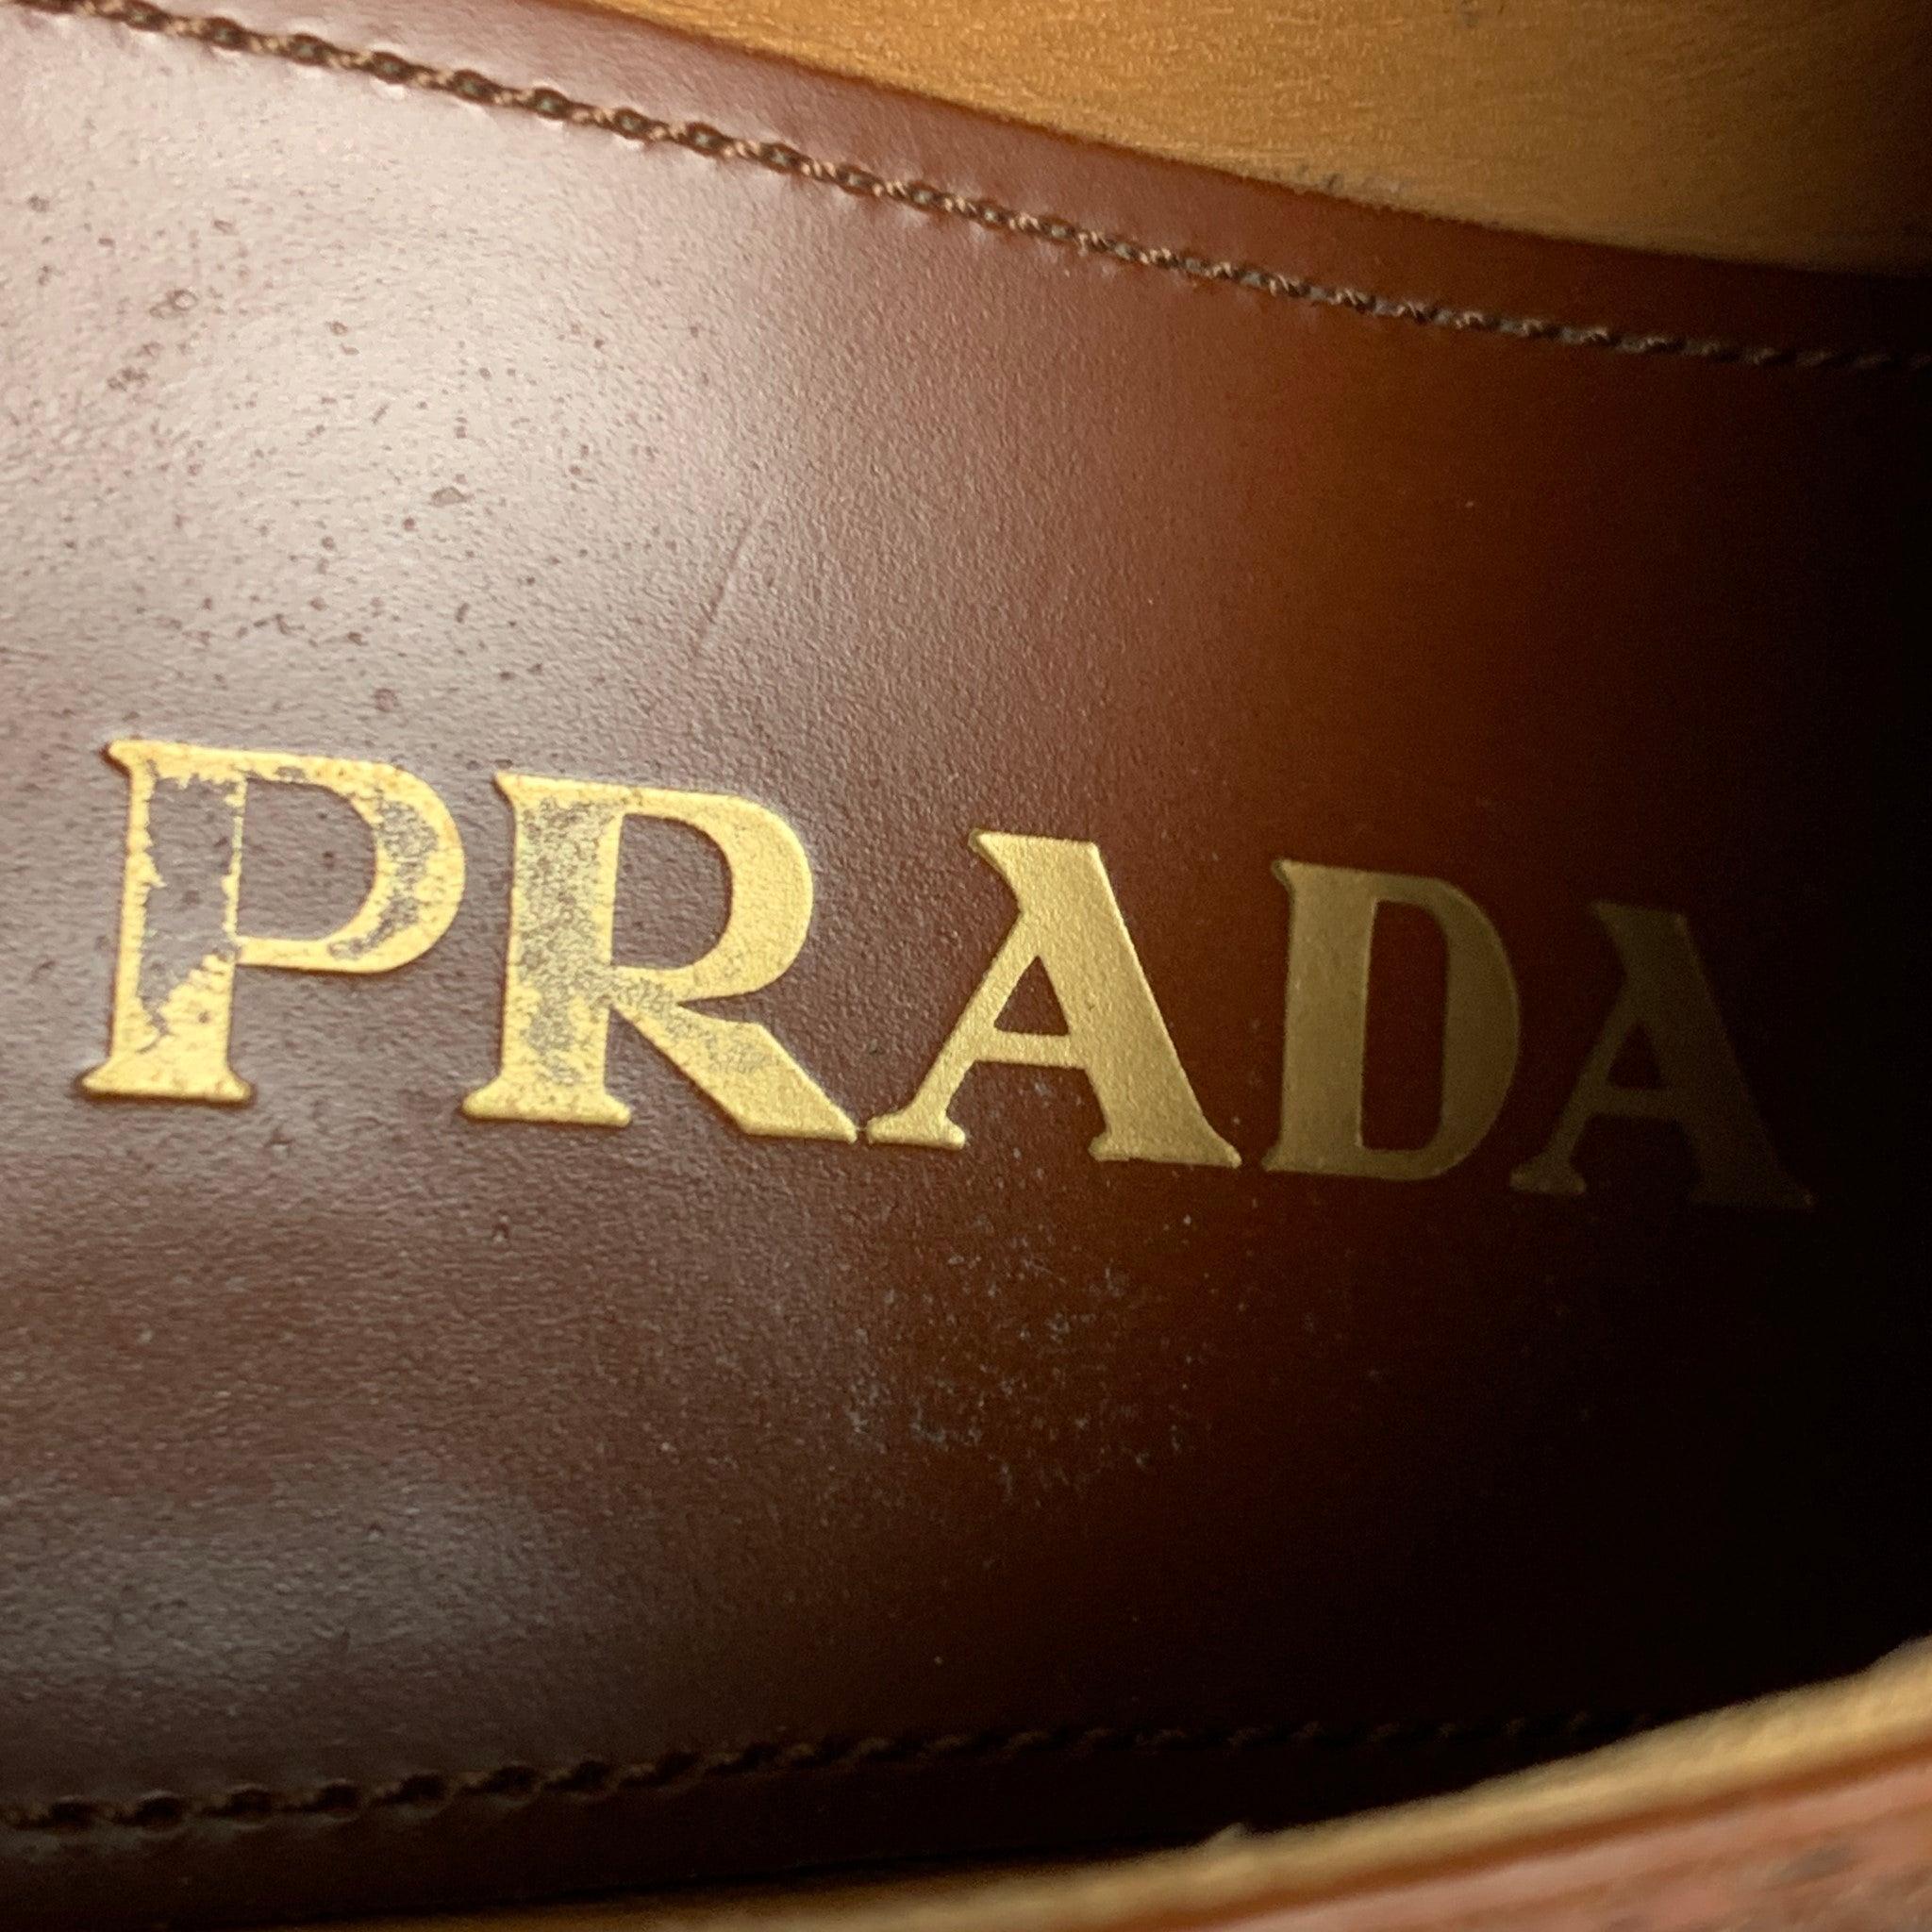 PRADA Size 6.5 Tan Leather Perforated Wingtip Shoes For Sale 3